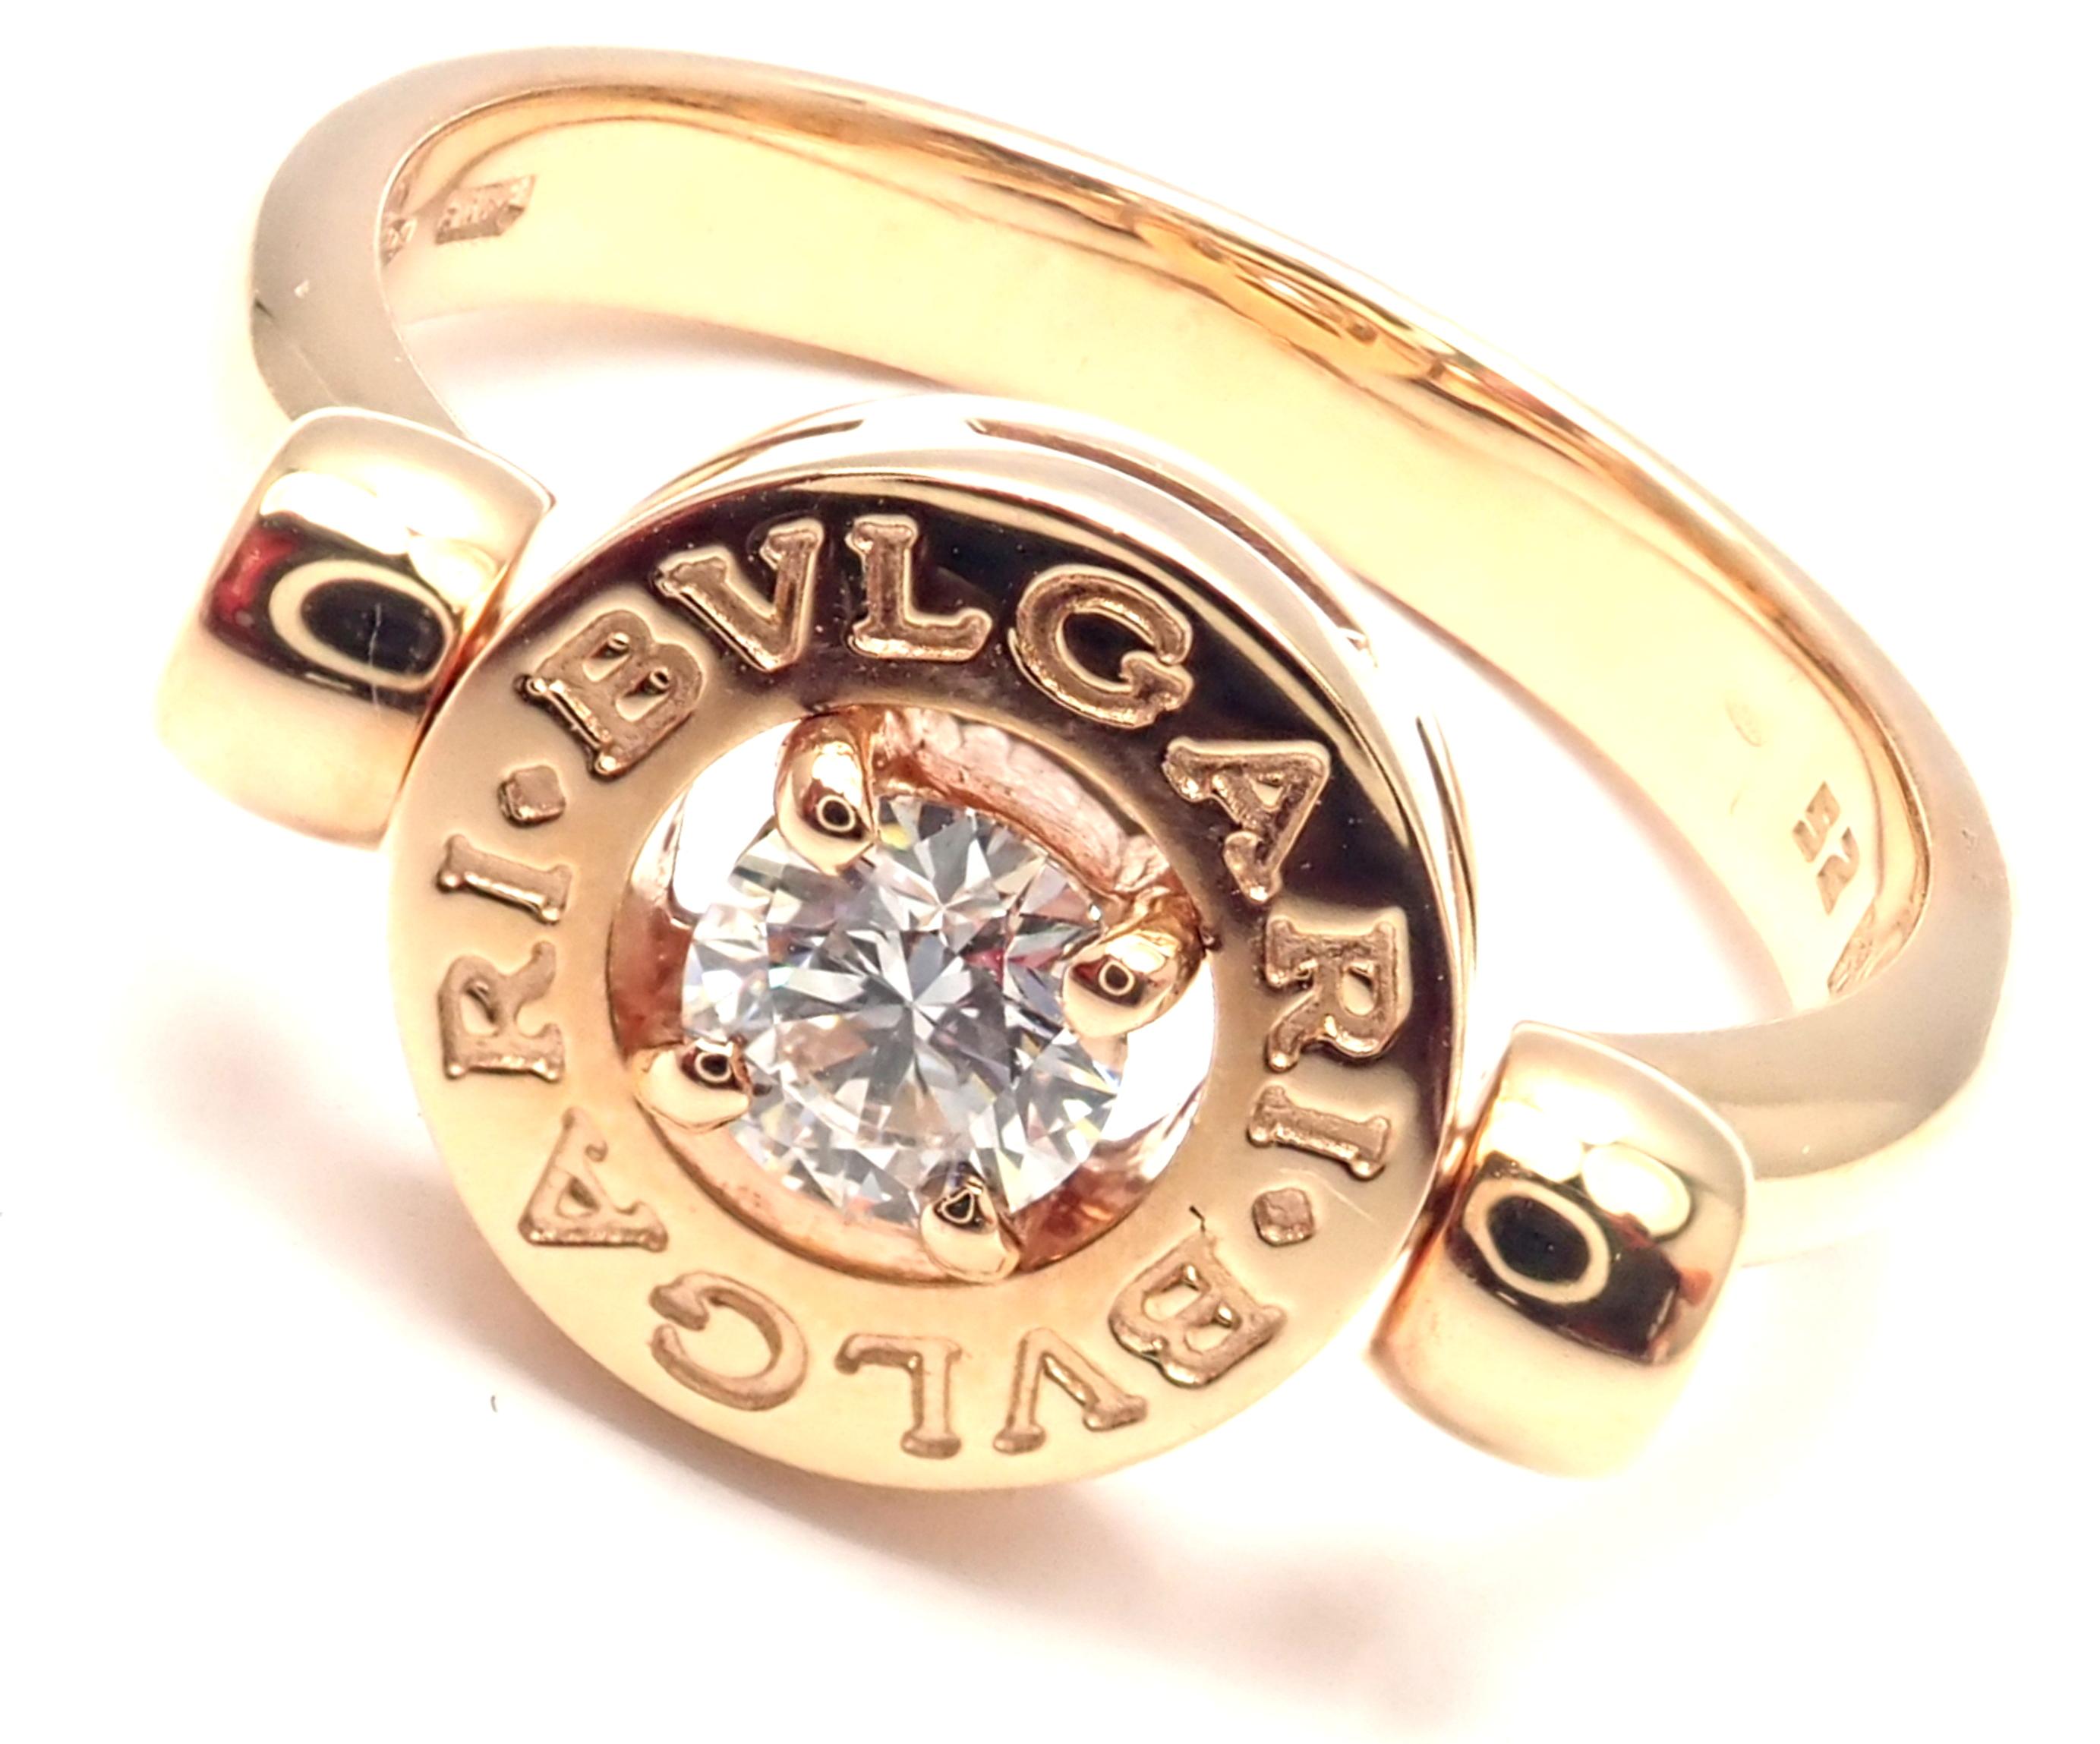 18k Rose Gold Diamond Flip Band Ring by Bulgari. 
With 1 Round brilliant cut diamonds VVS1 clarity, E color total weight approx. .25ct
Details:
Ring Size: European 51, US 5 3/4 
Weight: 6.1 grams
Width: 9mm
Stamped Hallmarks: Bvlgari 750 Made in